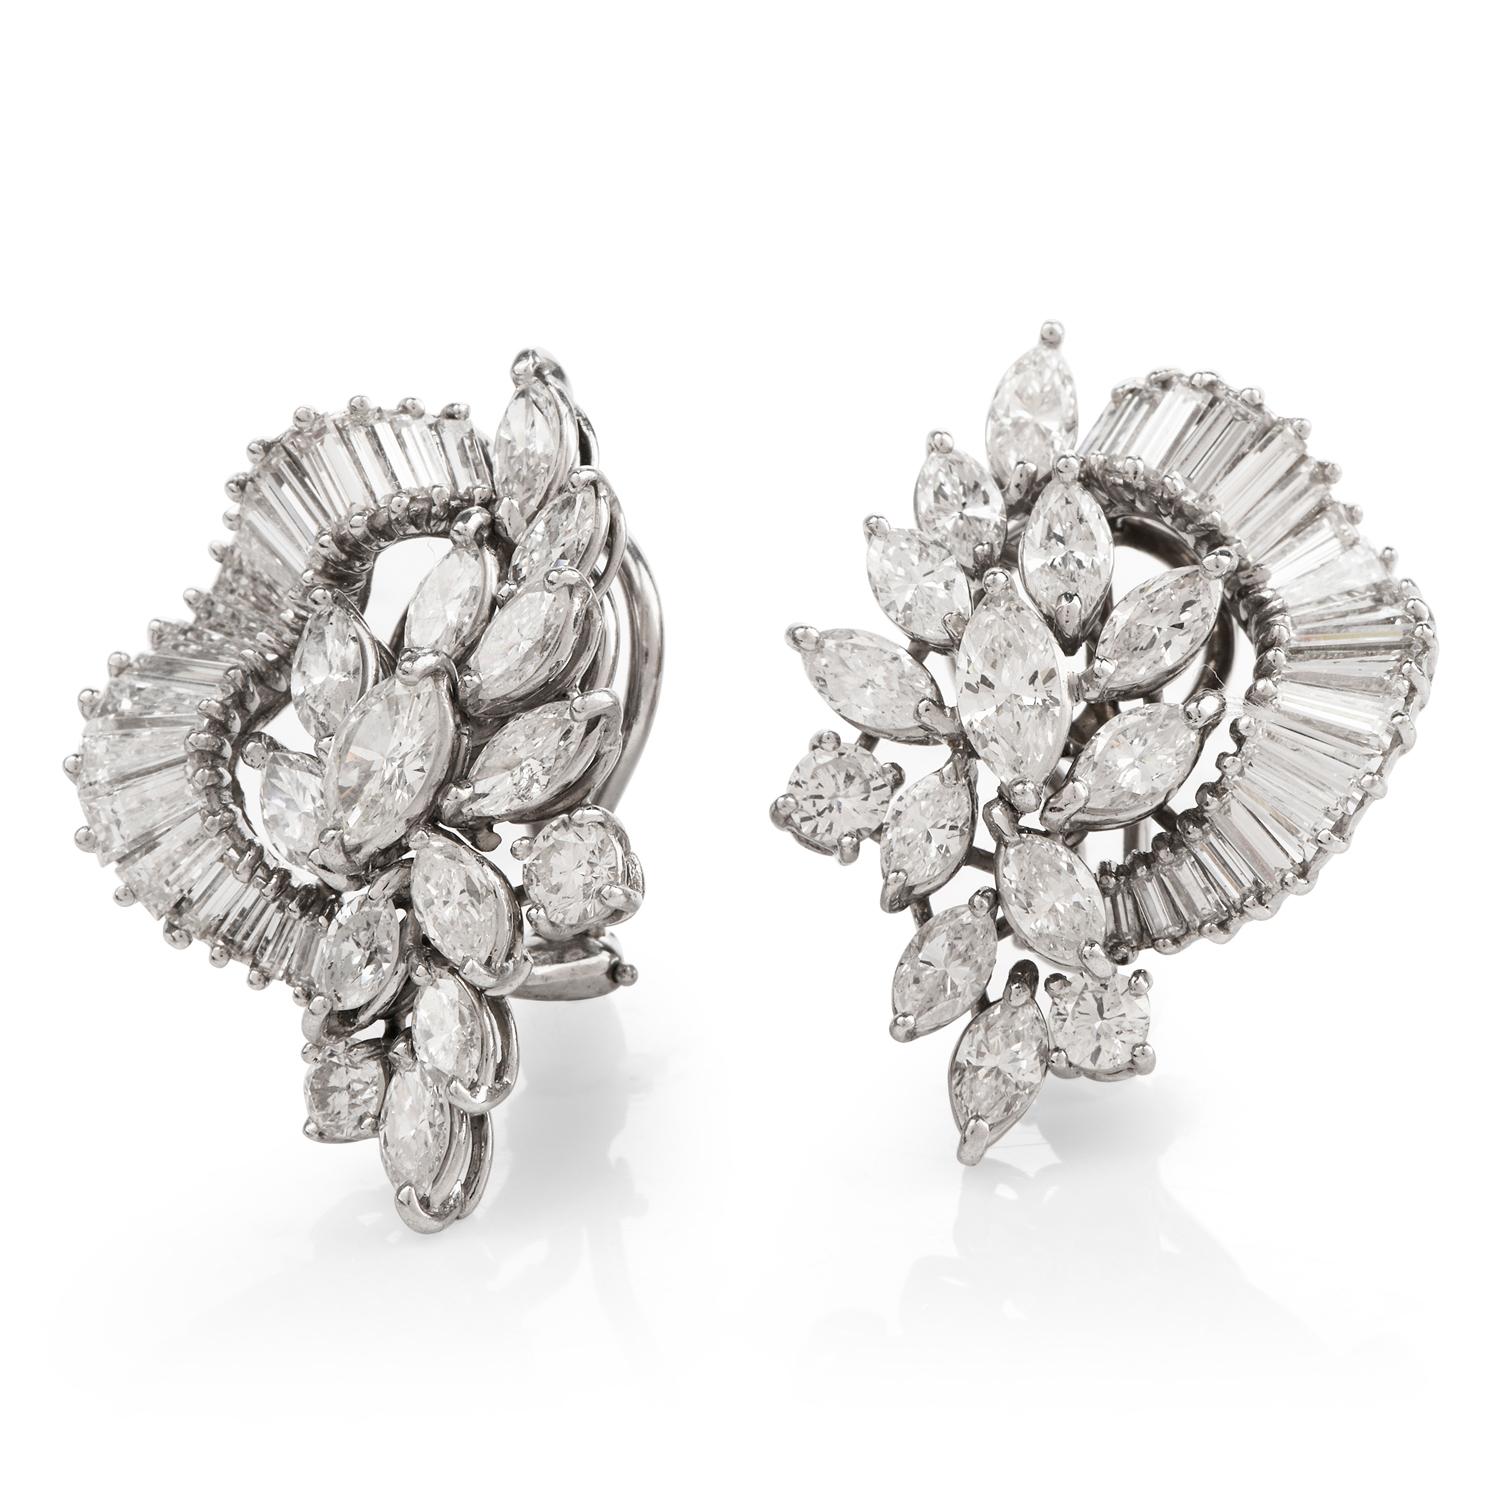 These shimmering diamond clip-on earrings are crafted in solid platinum weighing 18.5 grams and measuring 31mm long x 30mm wide. Displaying 24 marquise diamonds prong-set in a leaf-like pattern, collectively weighing approximately, 6.15 carats,